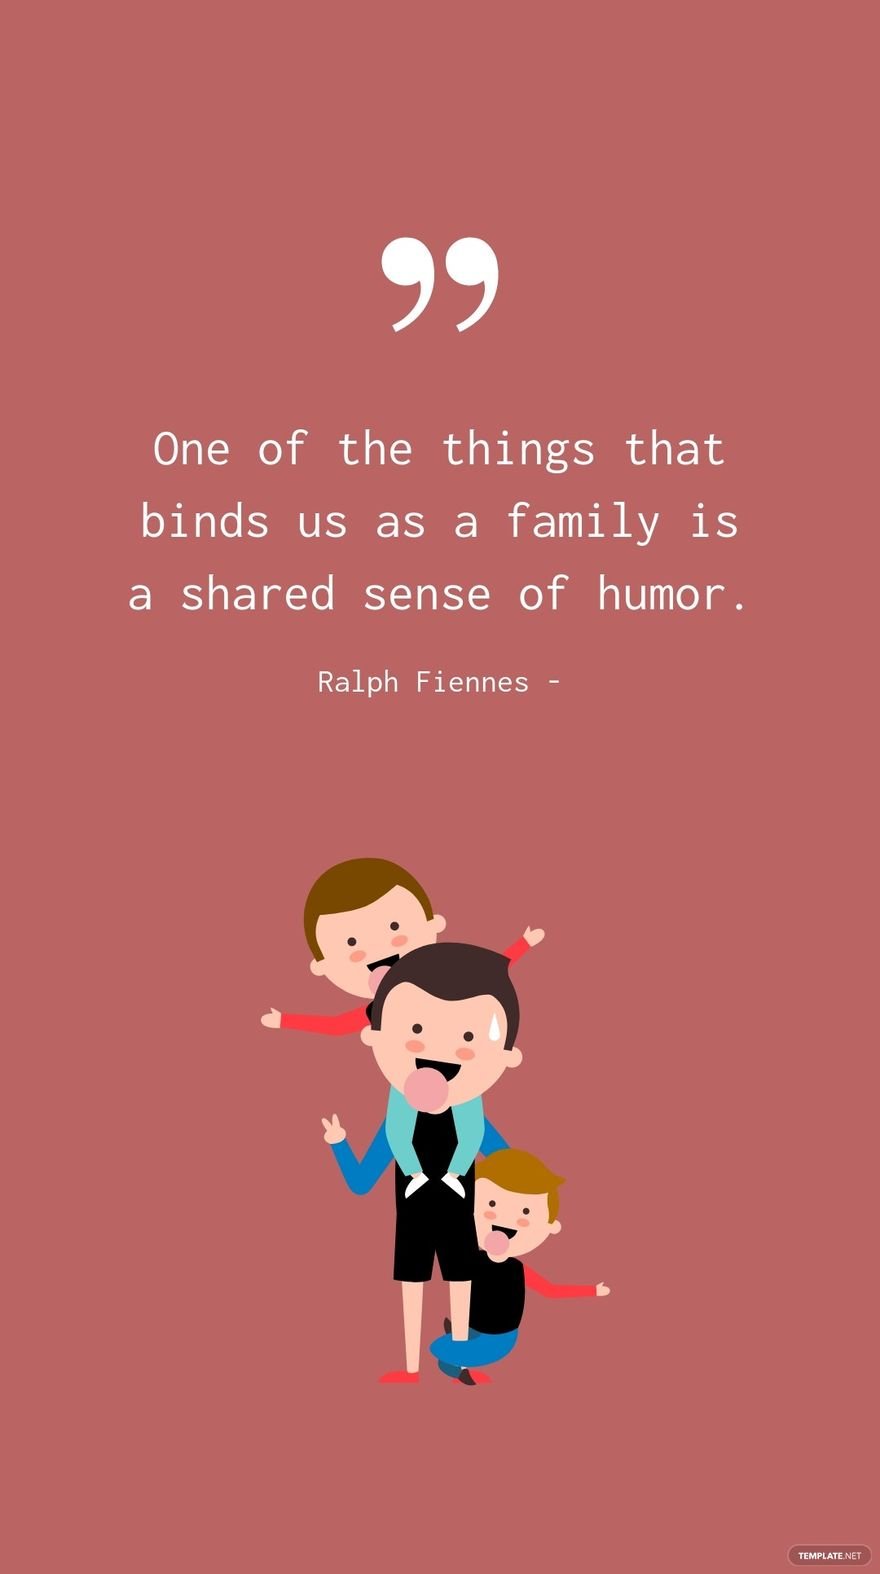 Ralph Fiennes - One of the things that binds us as a family is a shared sense of humor. in JPG